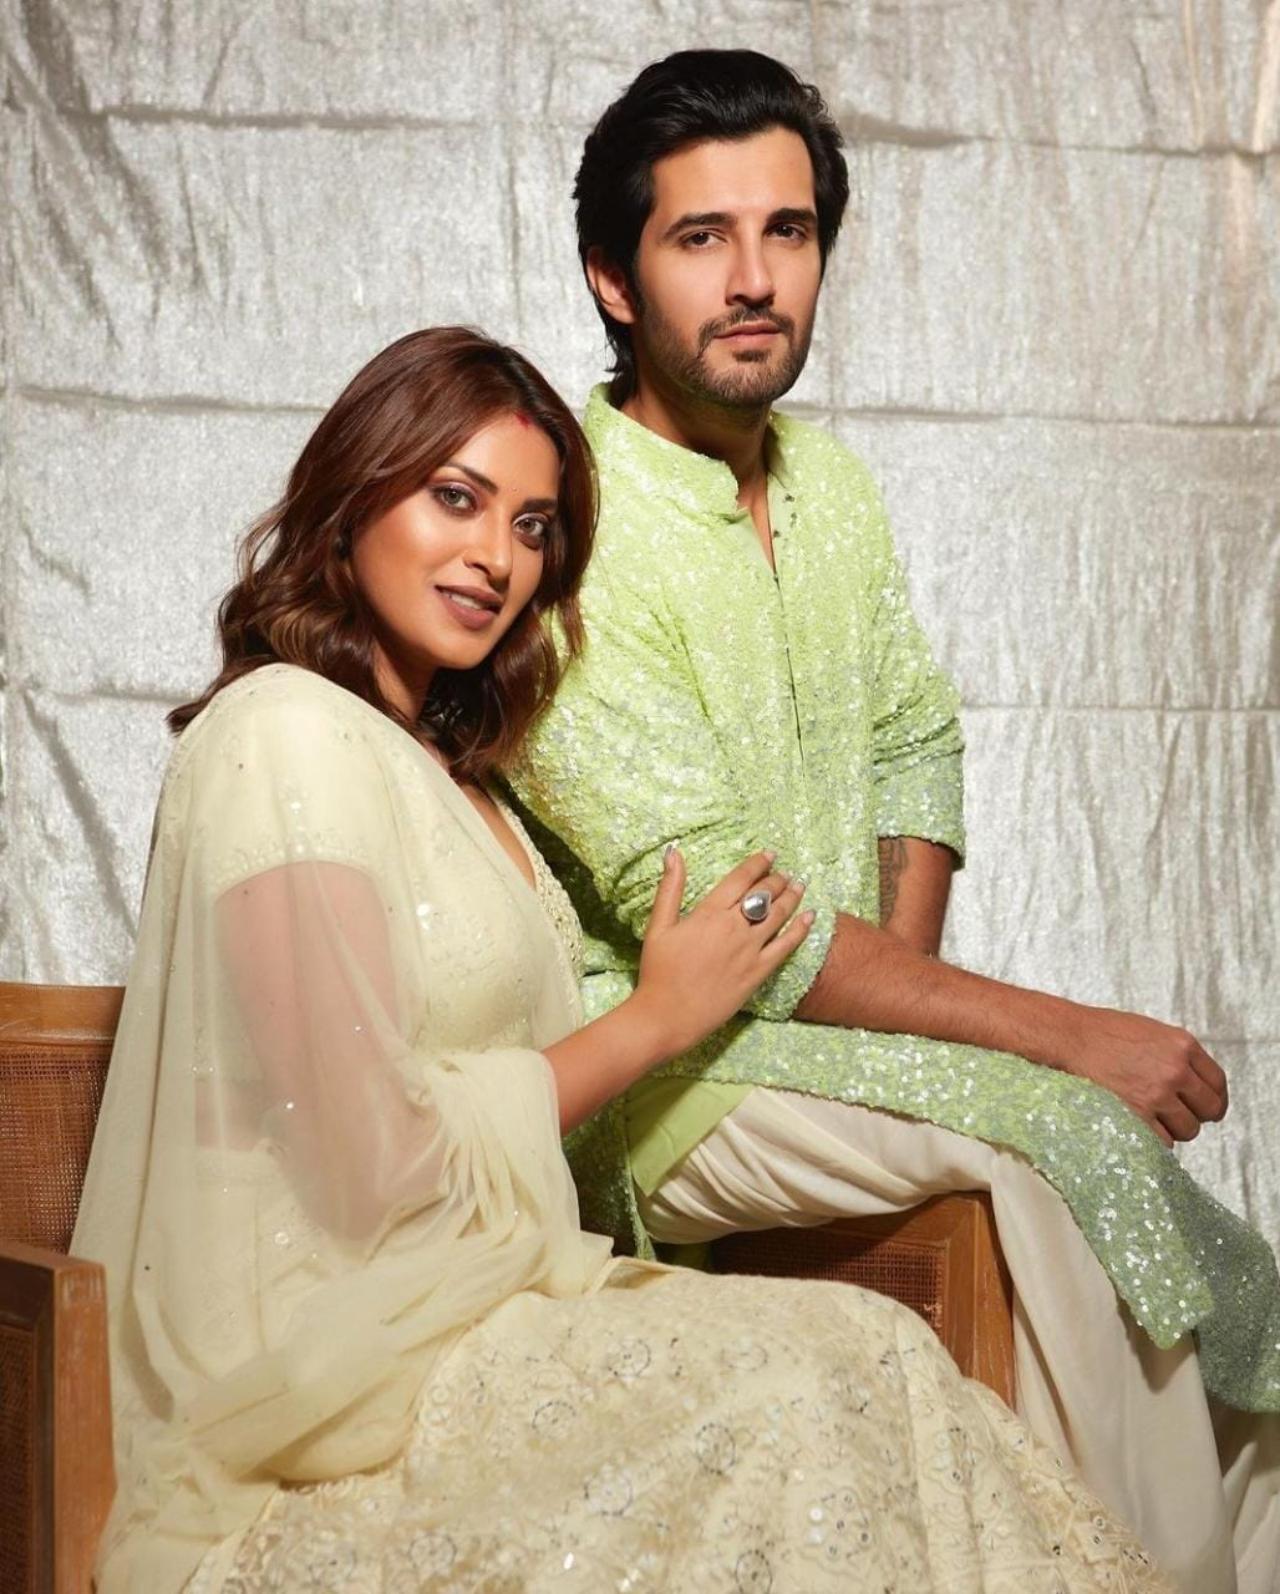 Starting the list of with a beautiful traditional couple look. We have Aditya and Anushka in a beautiful green shaded traditional outfits as they both look stunning in their matching attires. The couple compliments the look with minimalistic accessories pairing it with their comforting smiles.